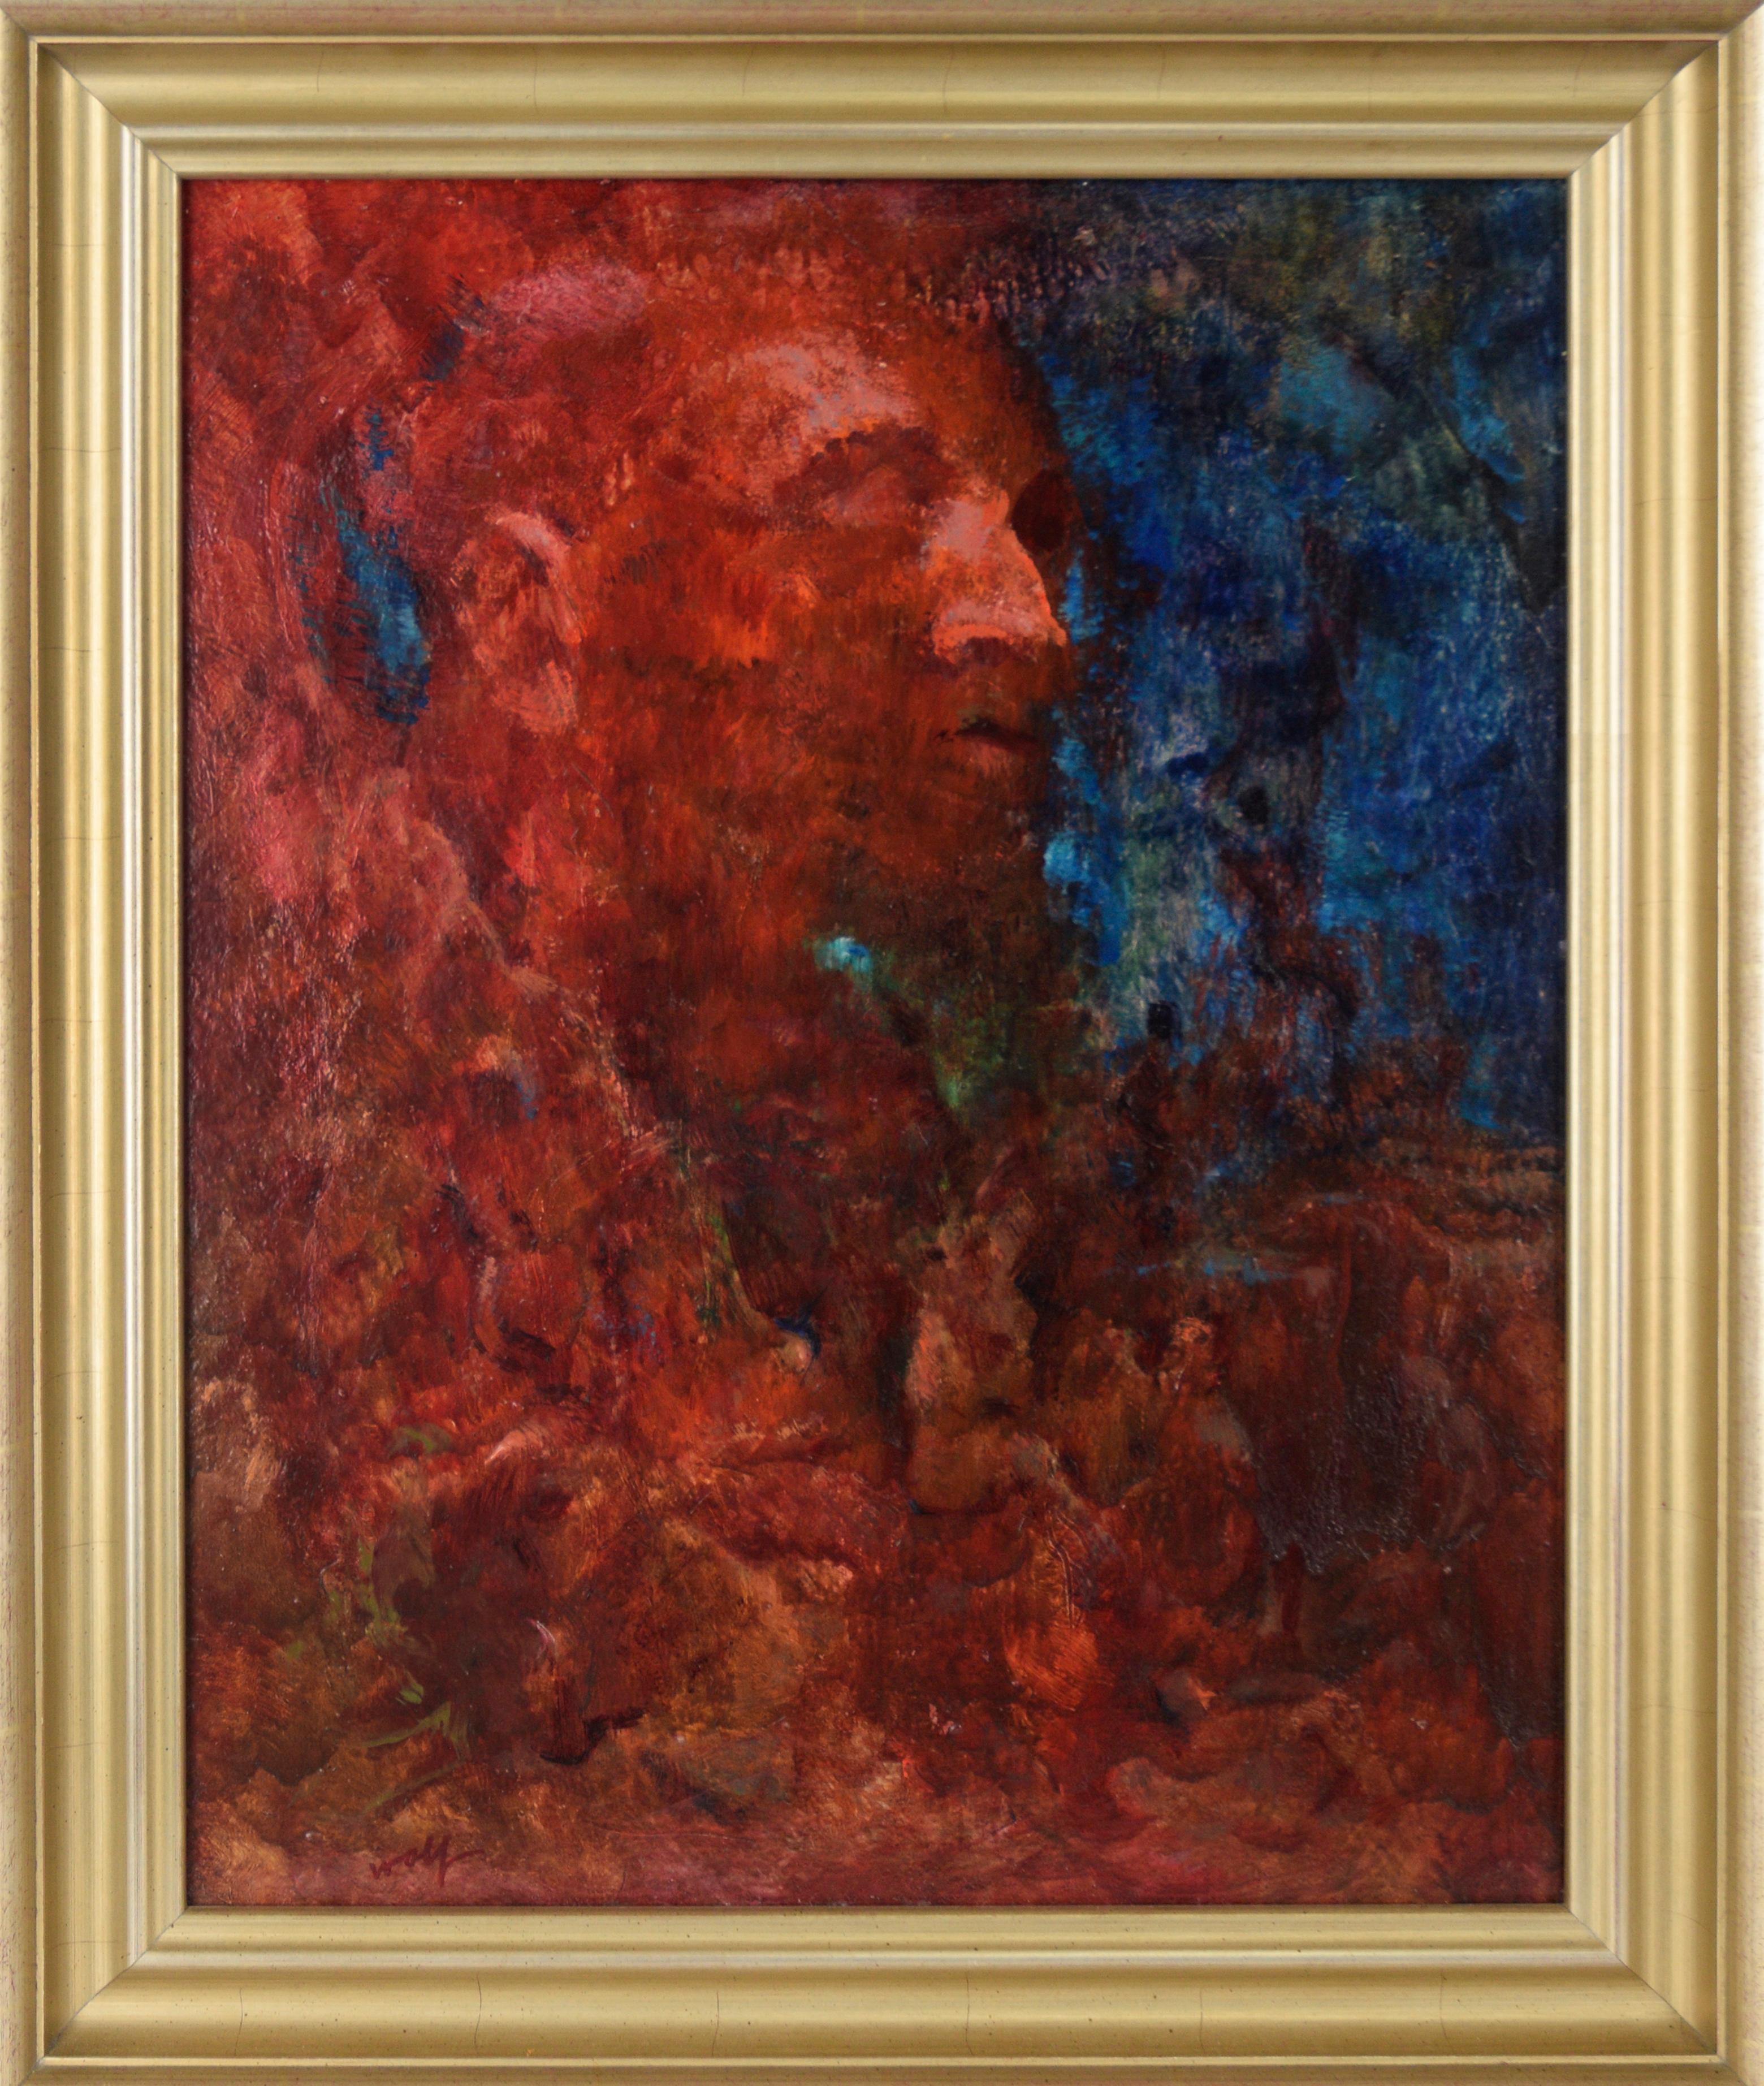 Hamilton Achille Wolf Abstract Painting - "The Visionary" - Abstract Expressionist Oil on Board 